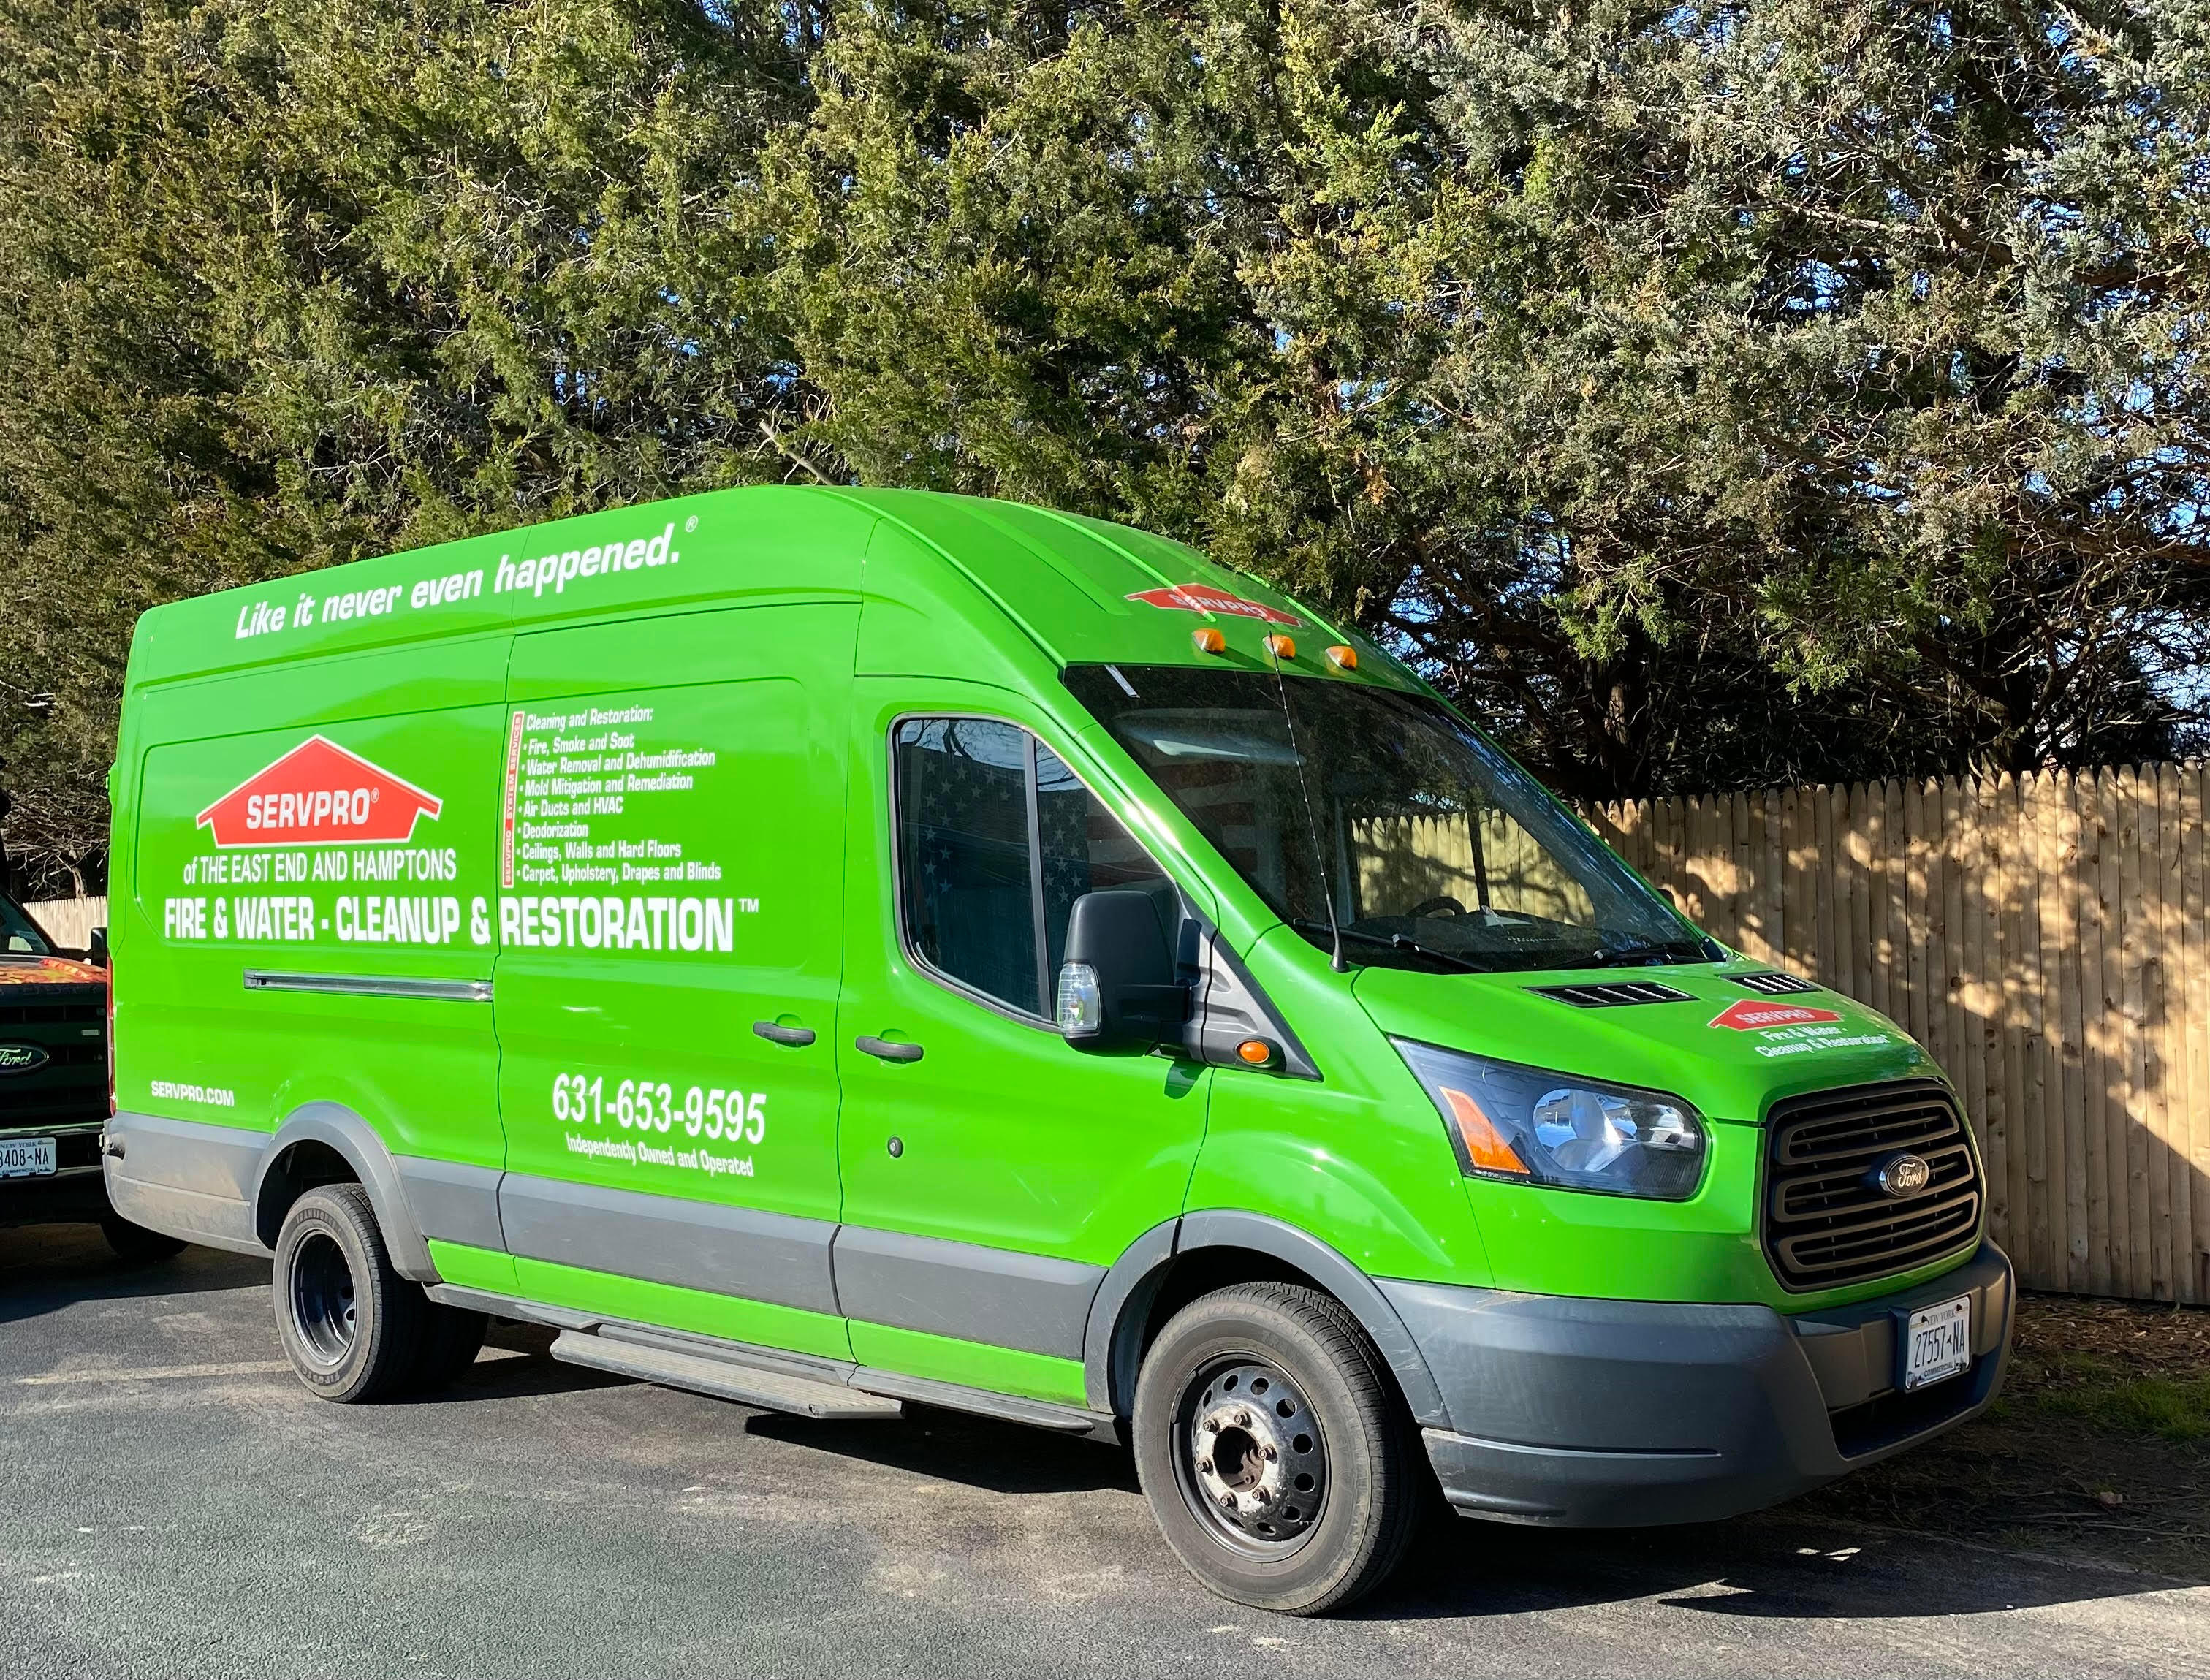 Company Van with Truck mount.  Servpro at your service. 631-653-9595